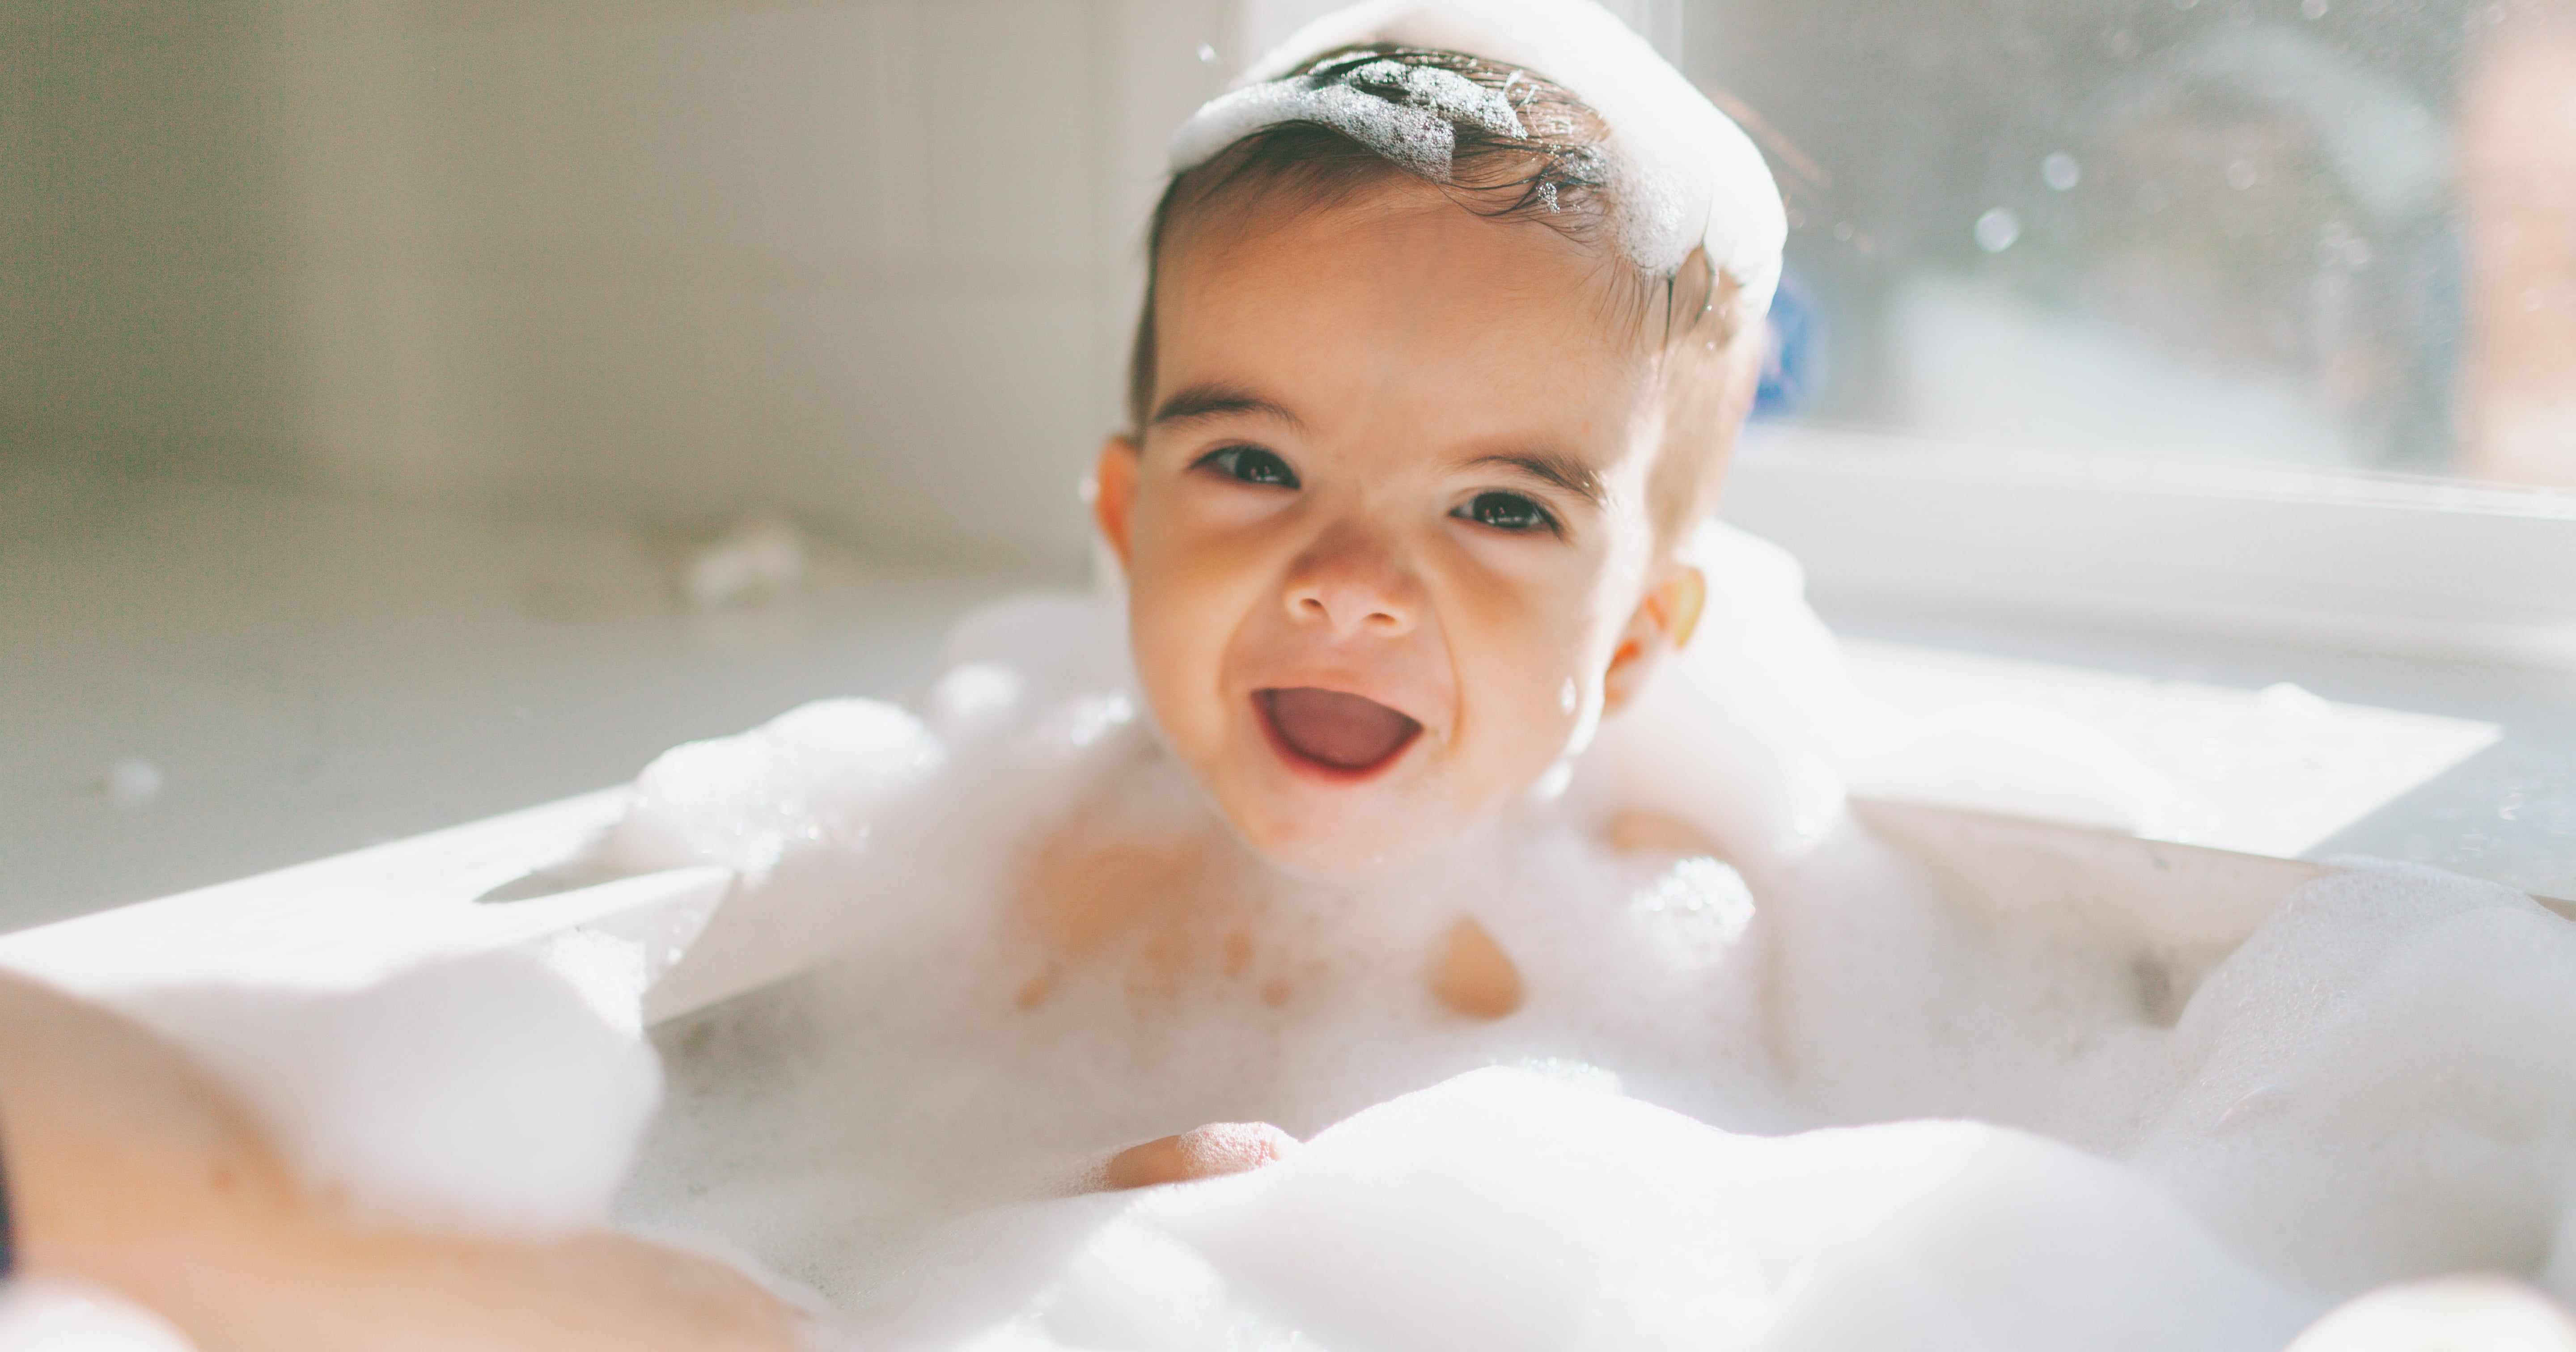 Can Toddlers Get Sick From Drinking Bath Water?